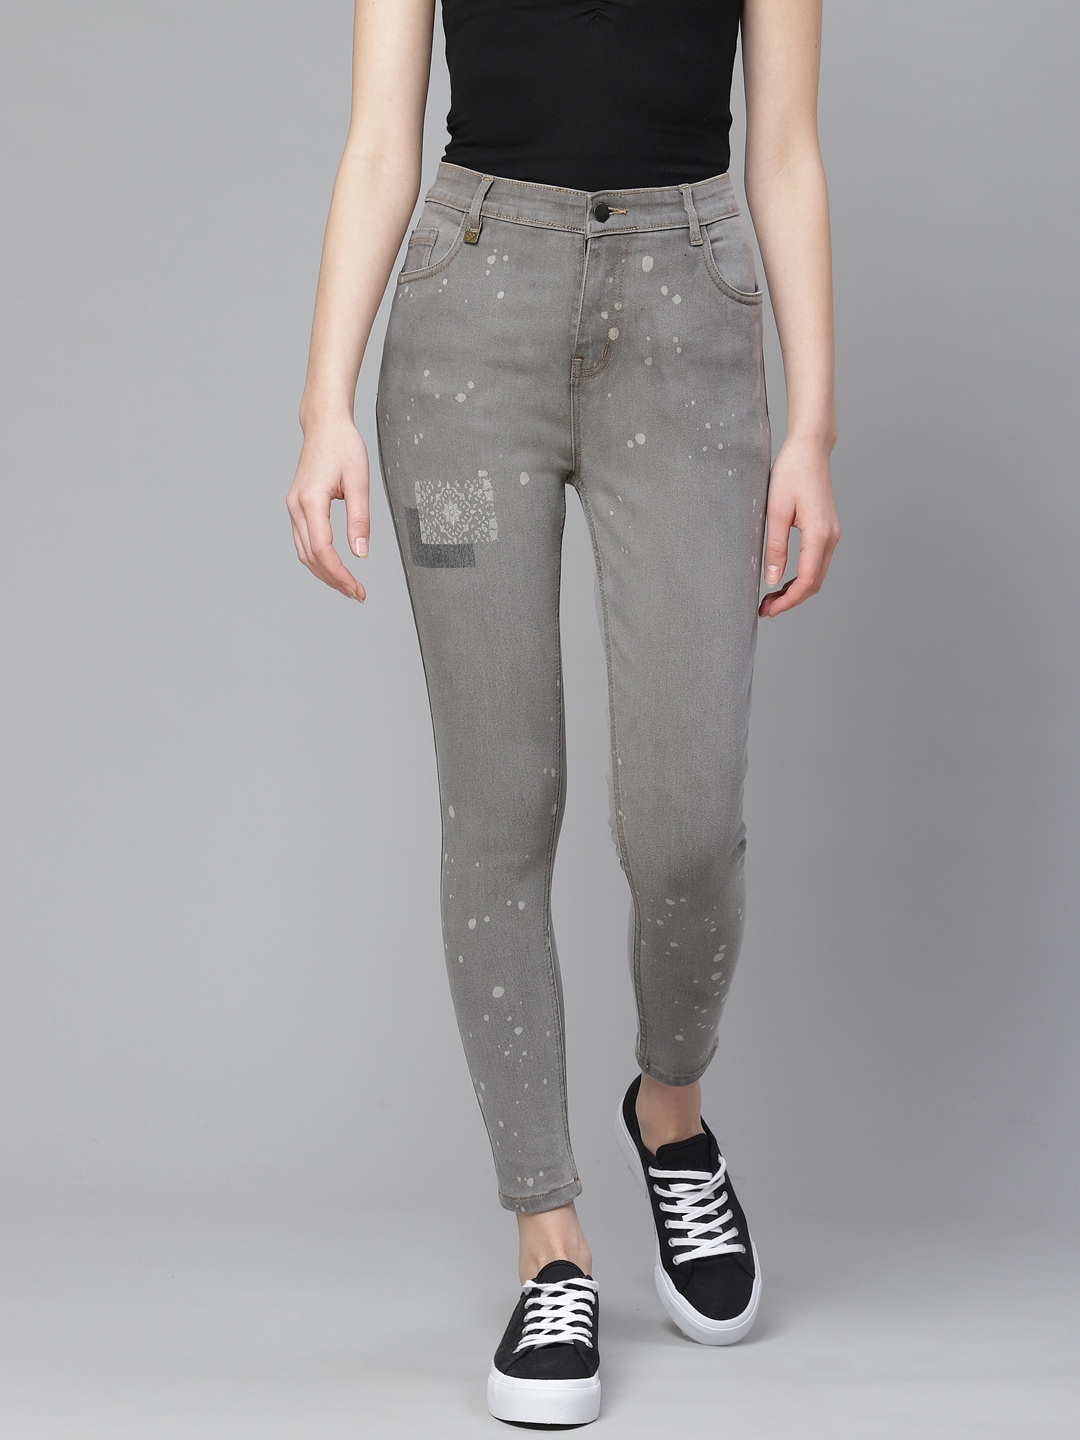 Hubberholme Women Grey Printed Slim Fit Mid-Rise Clean Look Stretchable Cropped Jeans